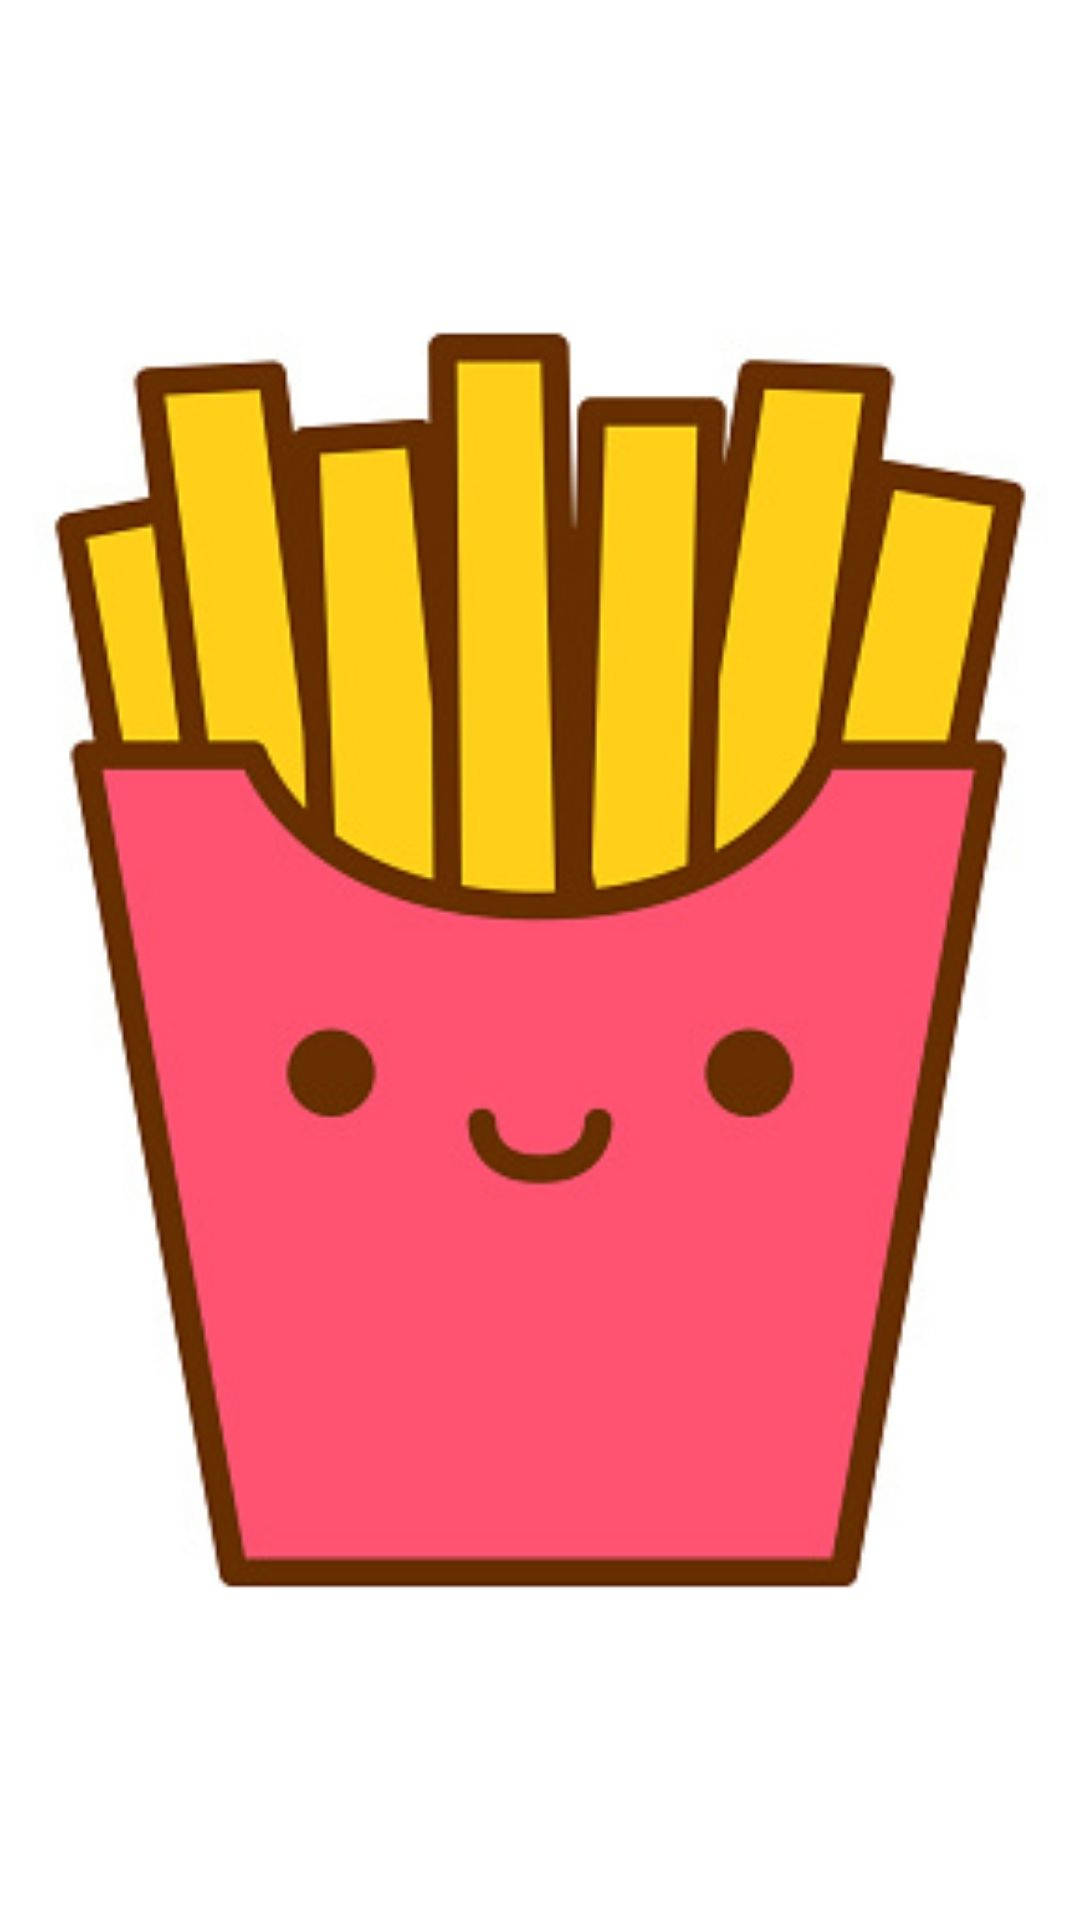 Playful Pink French Fries - Add a Pop of Color to Your Snack Time! Wallpaper